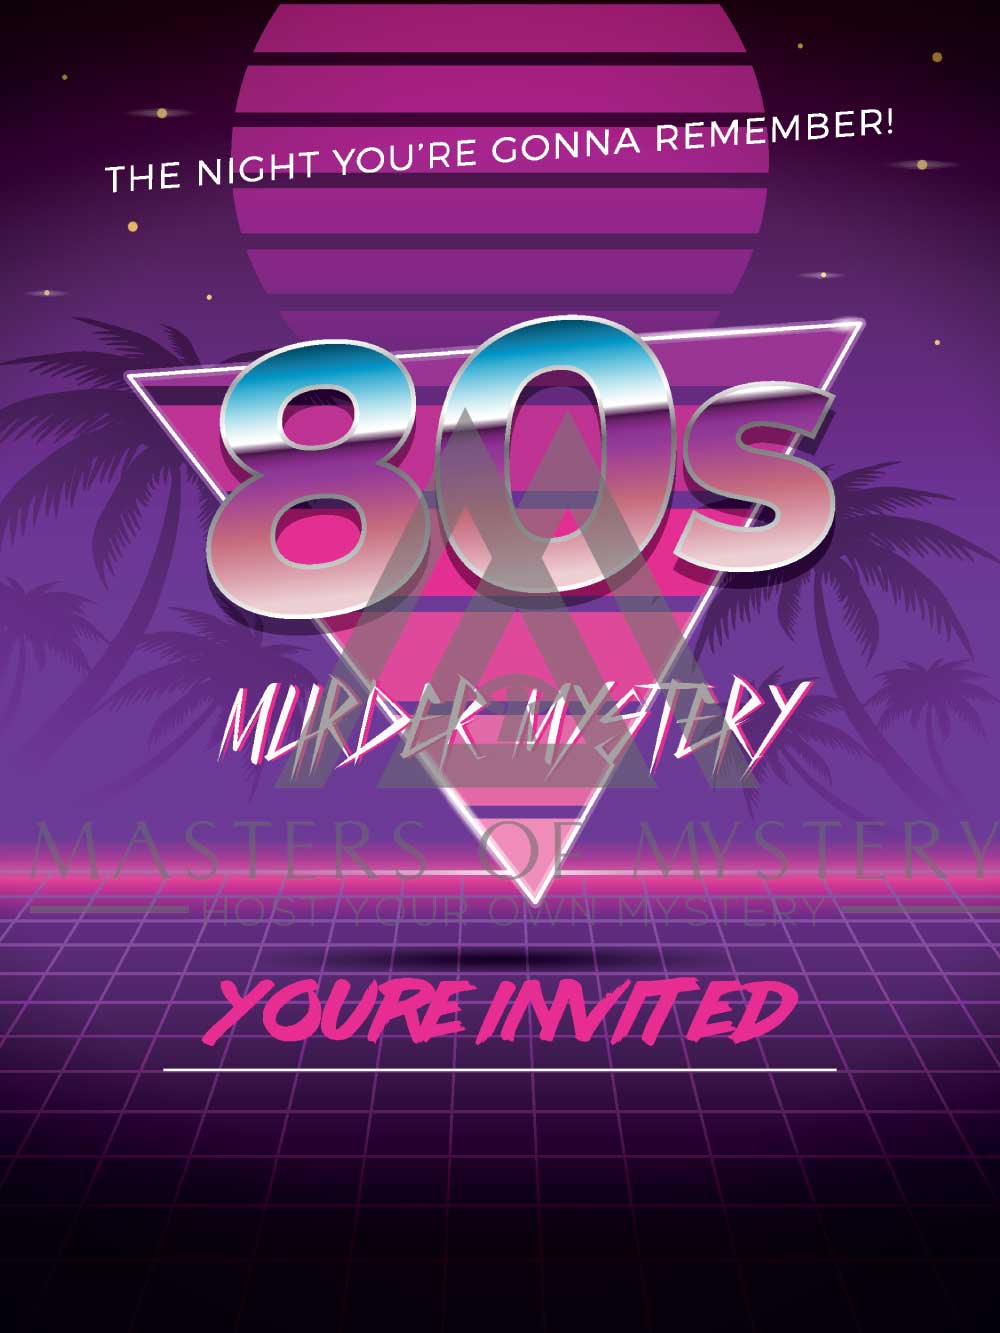 80s Mall Murder Madness an 80s-themed Murder Mystery Party Game. Virtual or  in Person. Instant Download Pdfs and Videos From Broadway Talent 